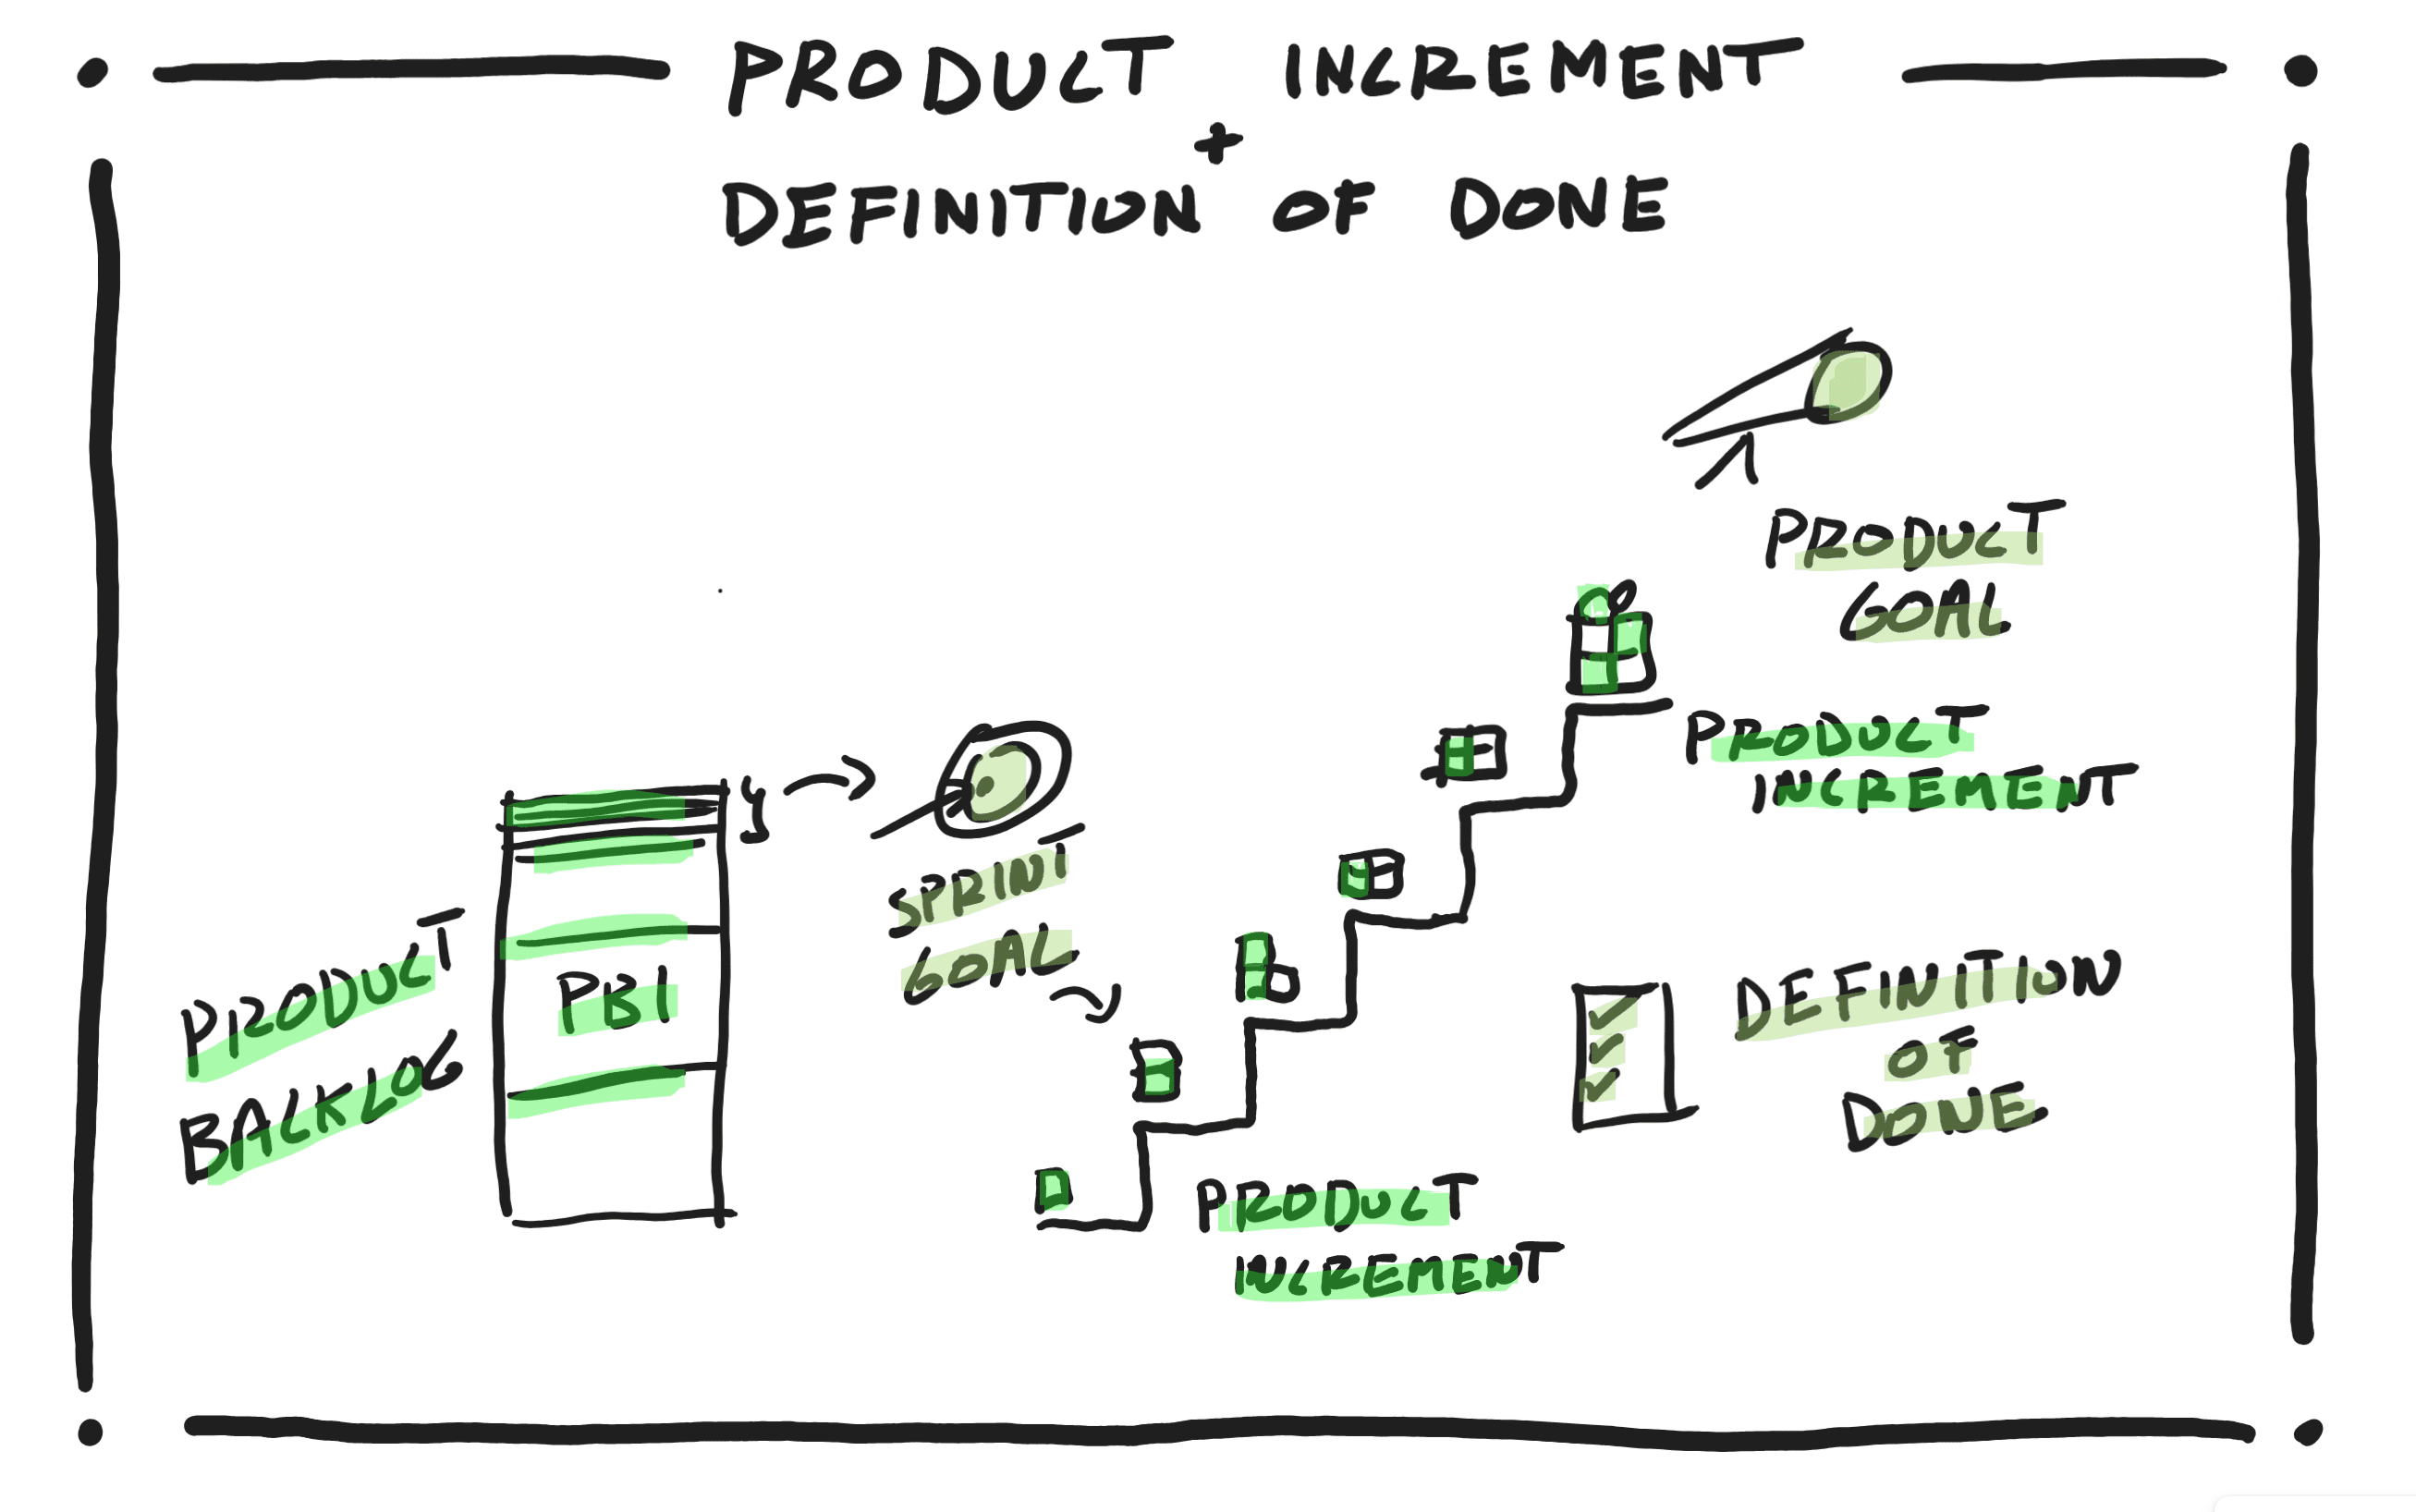 Read more about the article Product Increment and the Definition of Done in a Nutshell